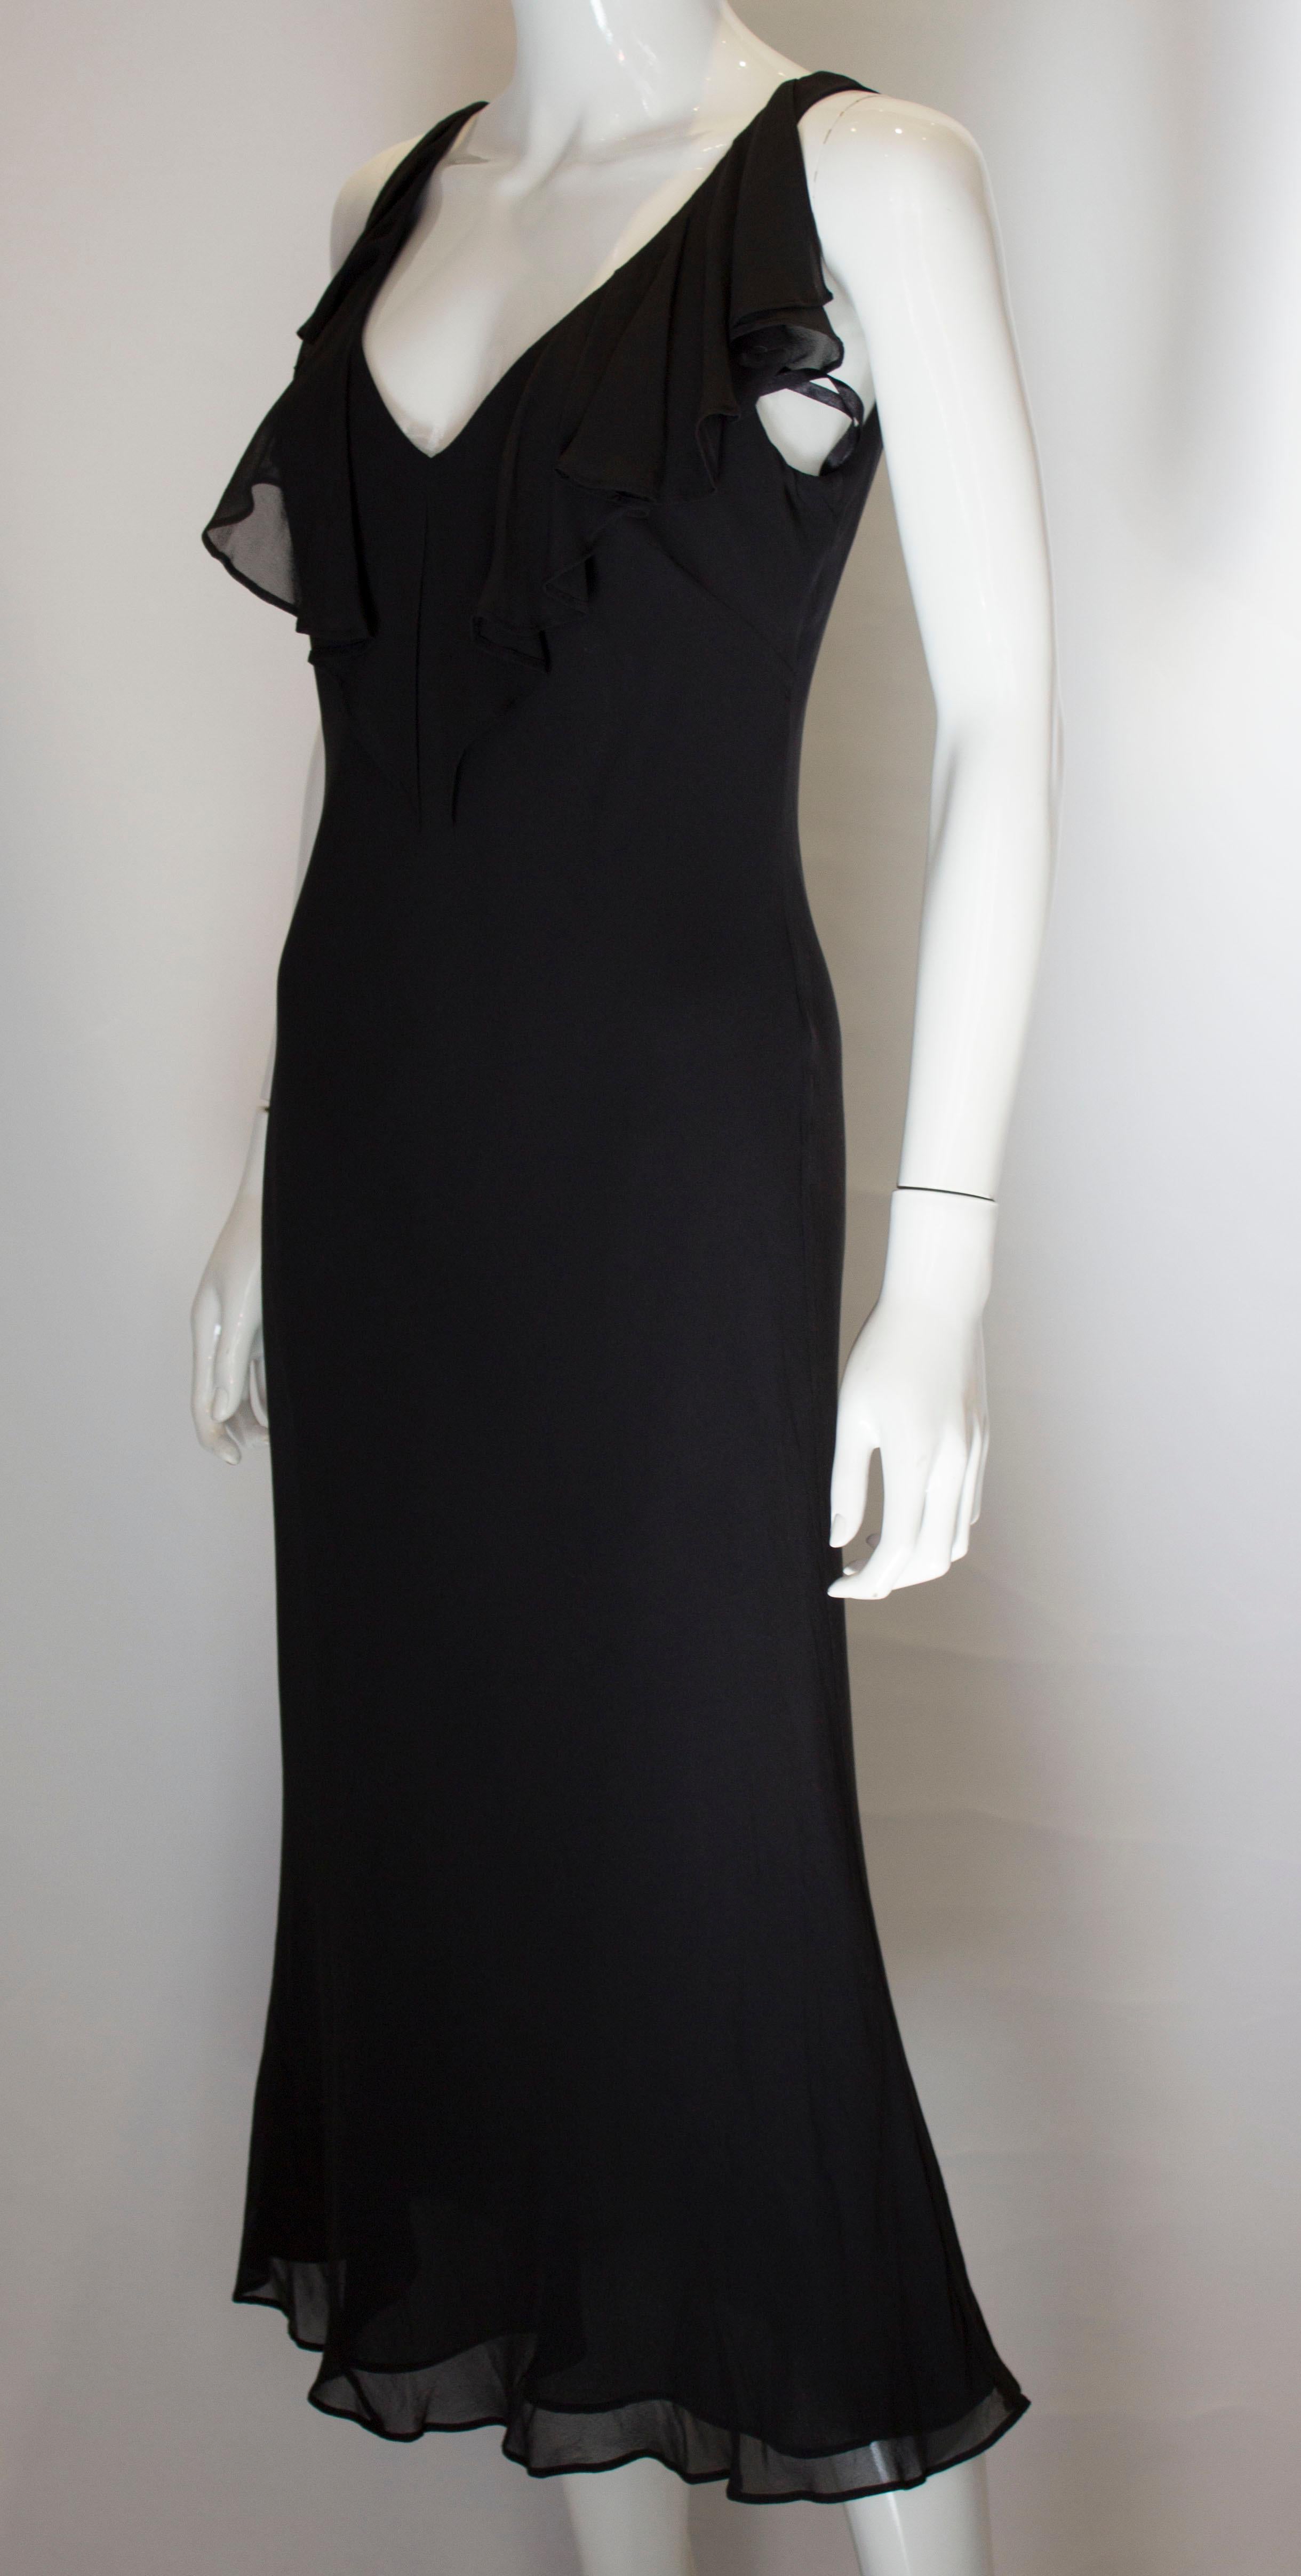 Vintage Slip Dress with Ruffle at Neckline In Good Condition For Sale In London, GB